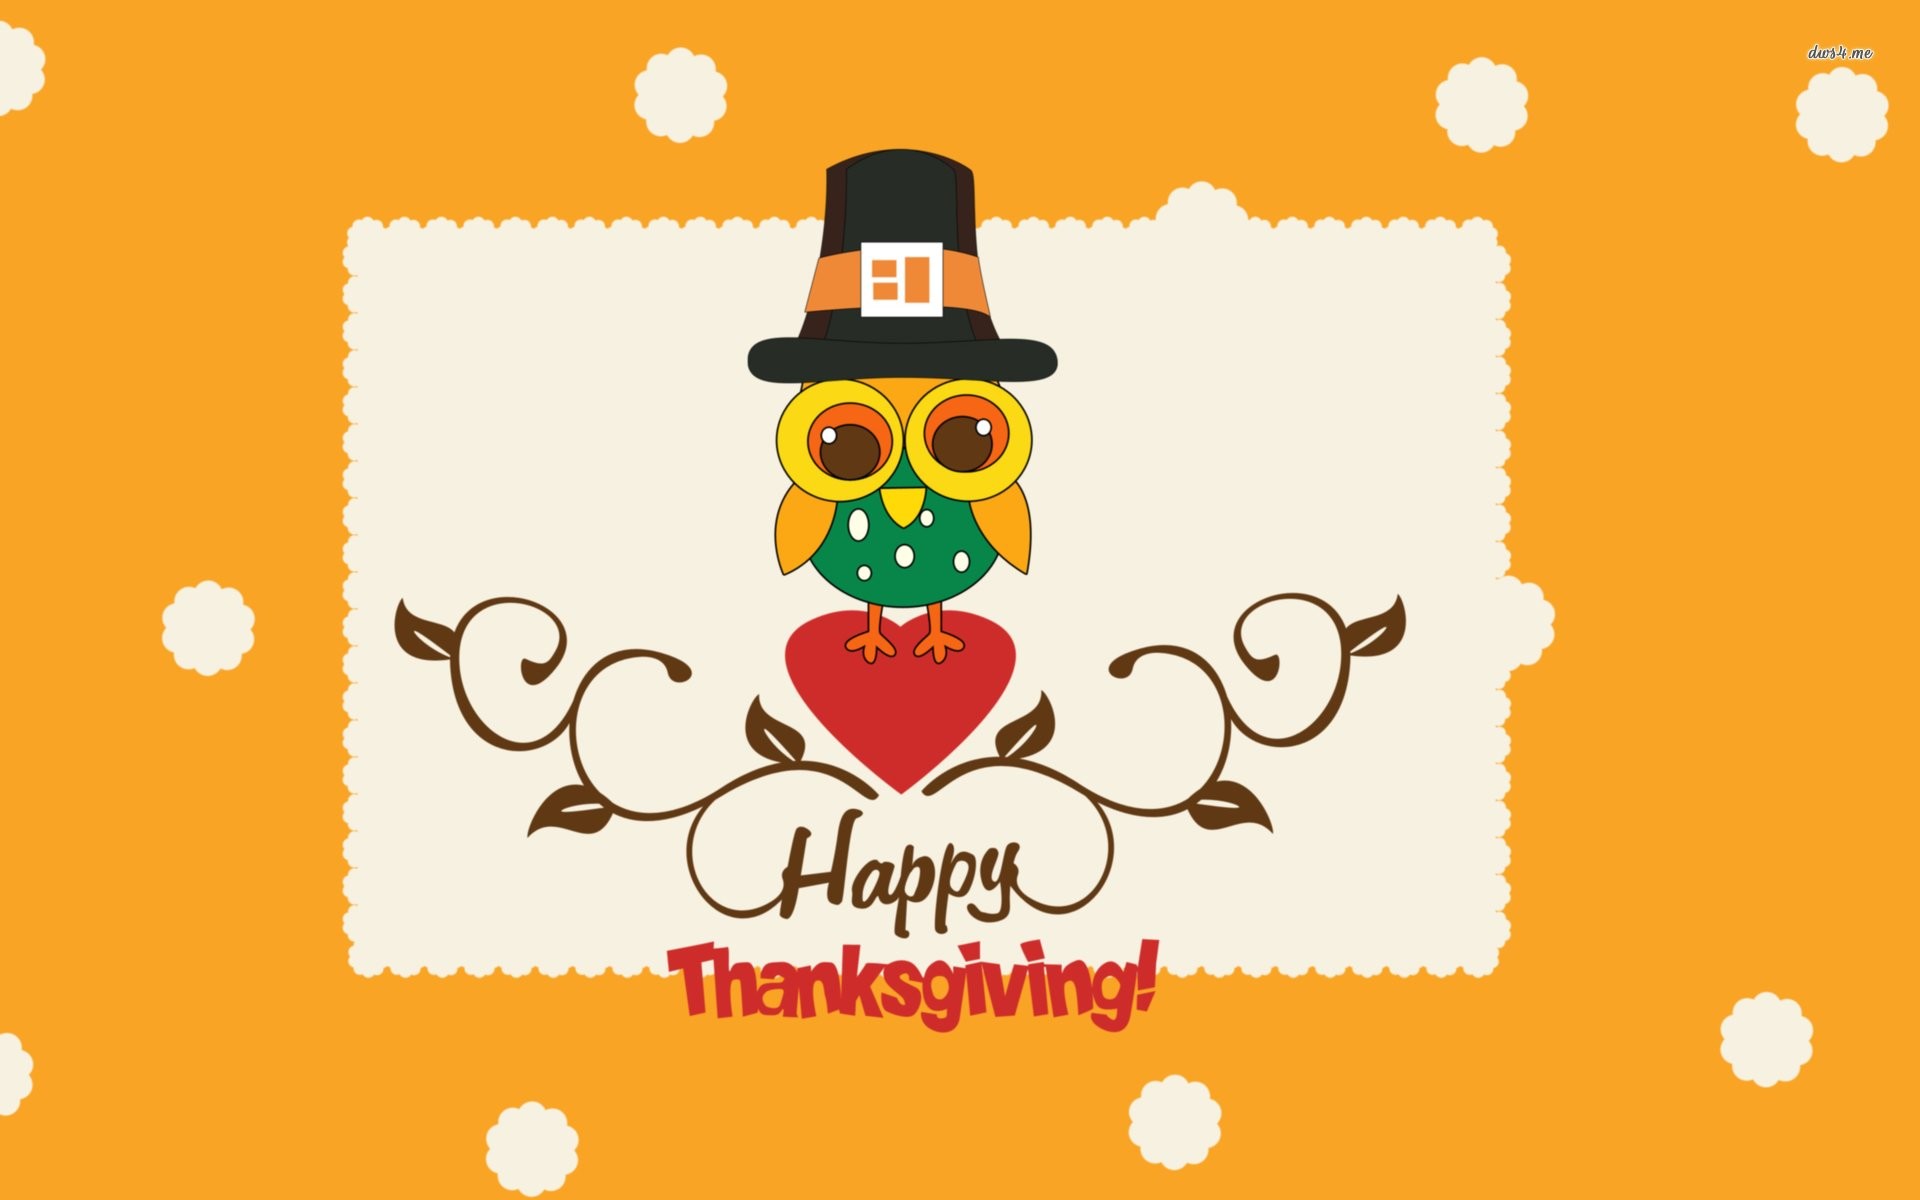 1920x1200 Top 15+ Images for Cute Owl Thanksgiving Wallpaper | Image No: 04. File